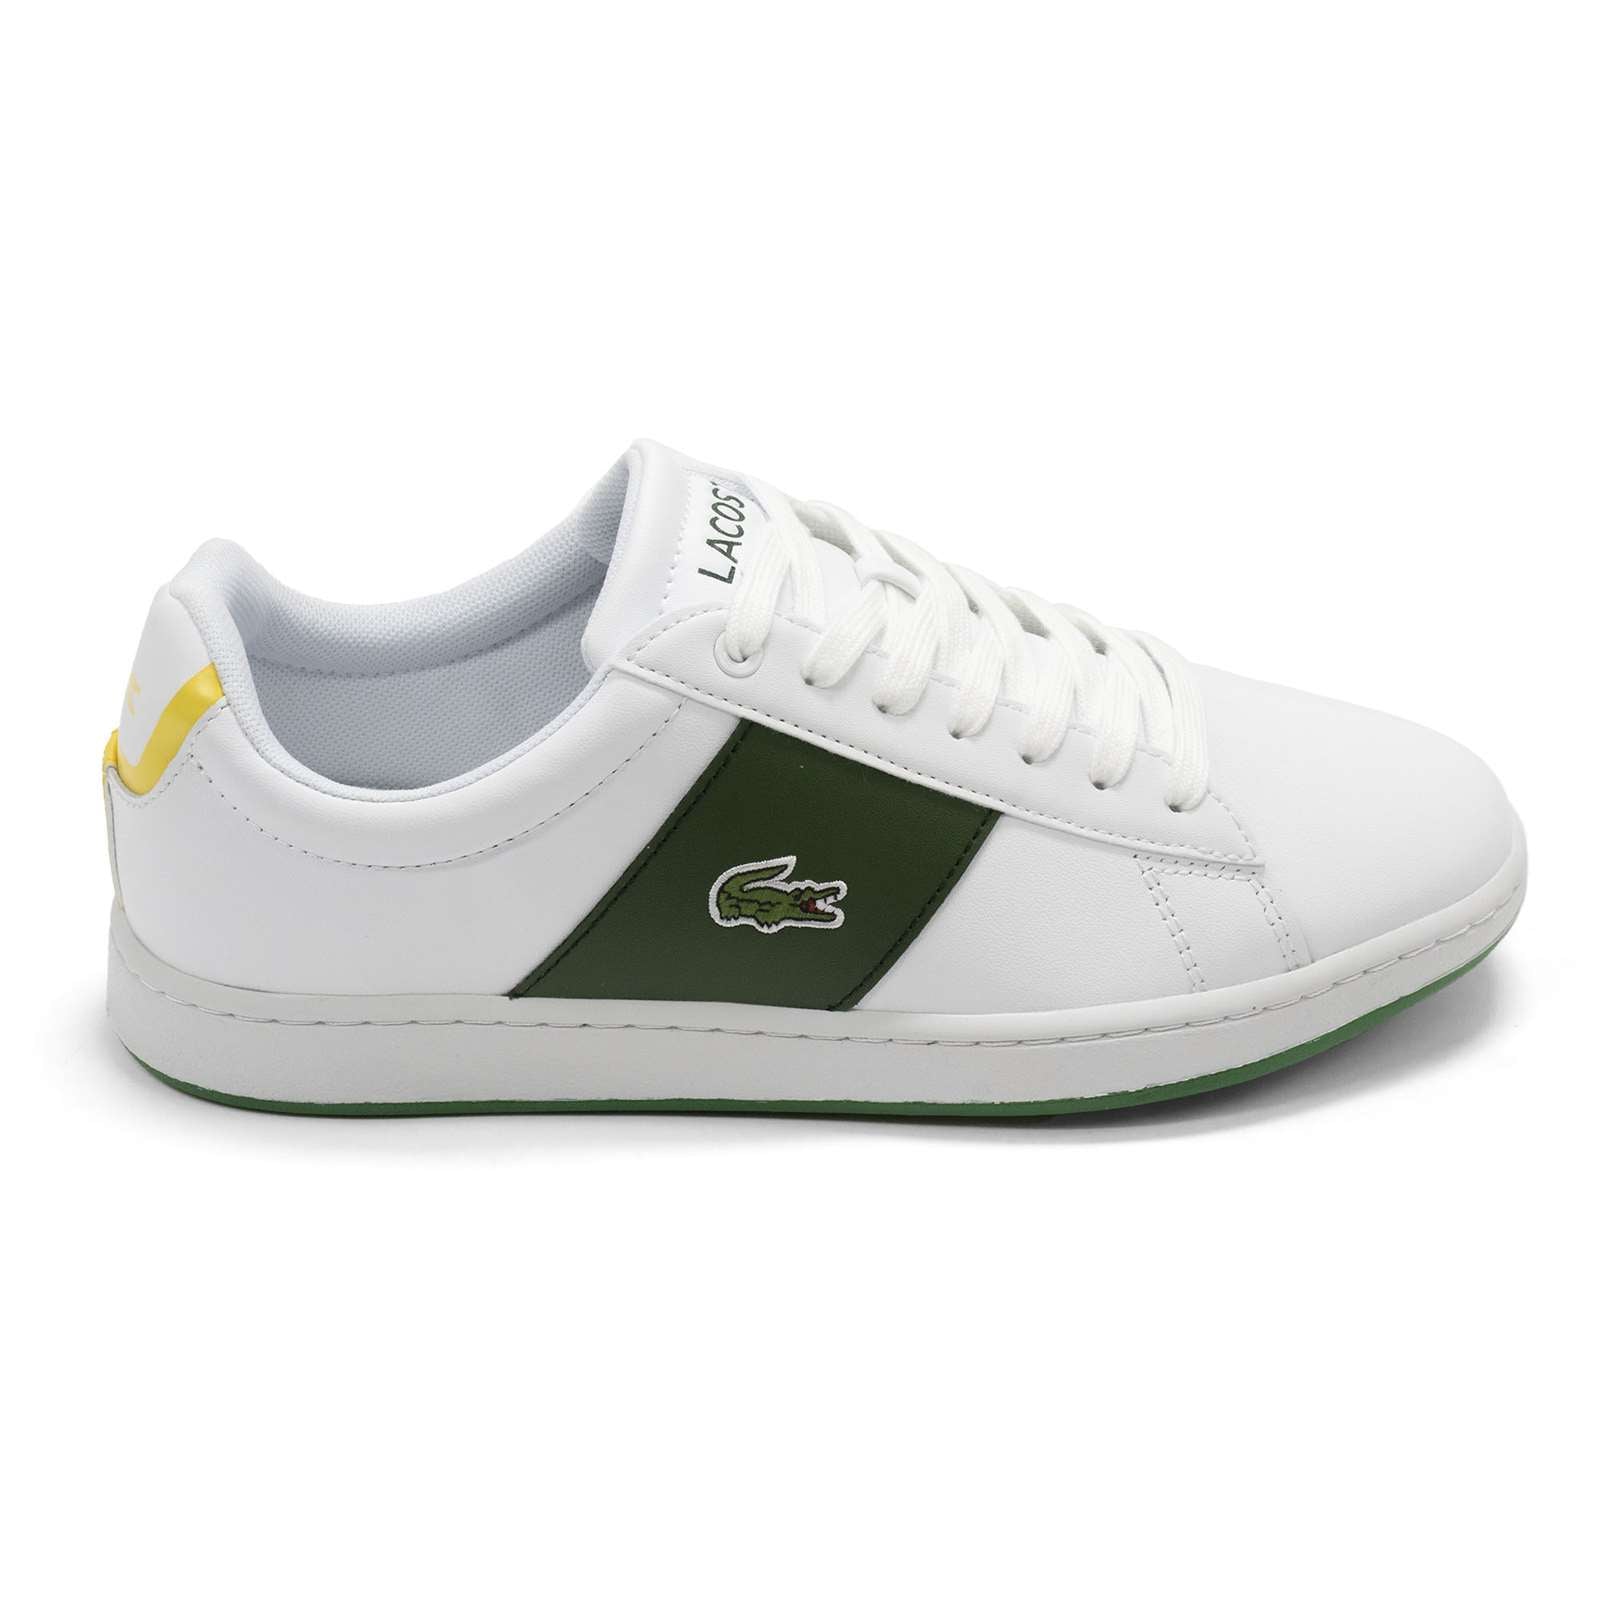 Lacoste Men Carnaby Evo 0722 3 Sma Leather Fashion Sneakers